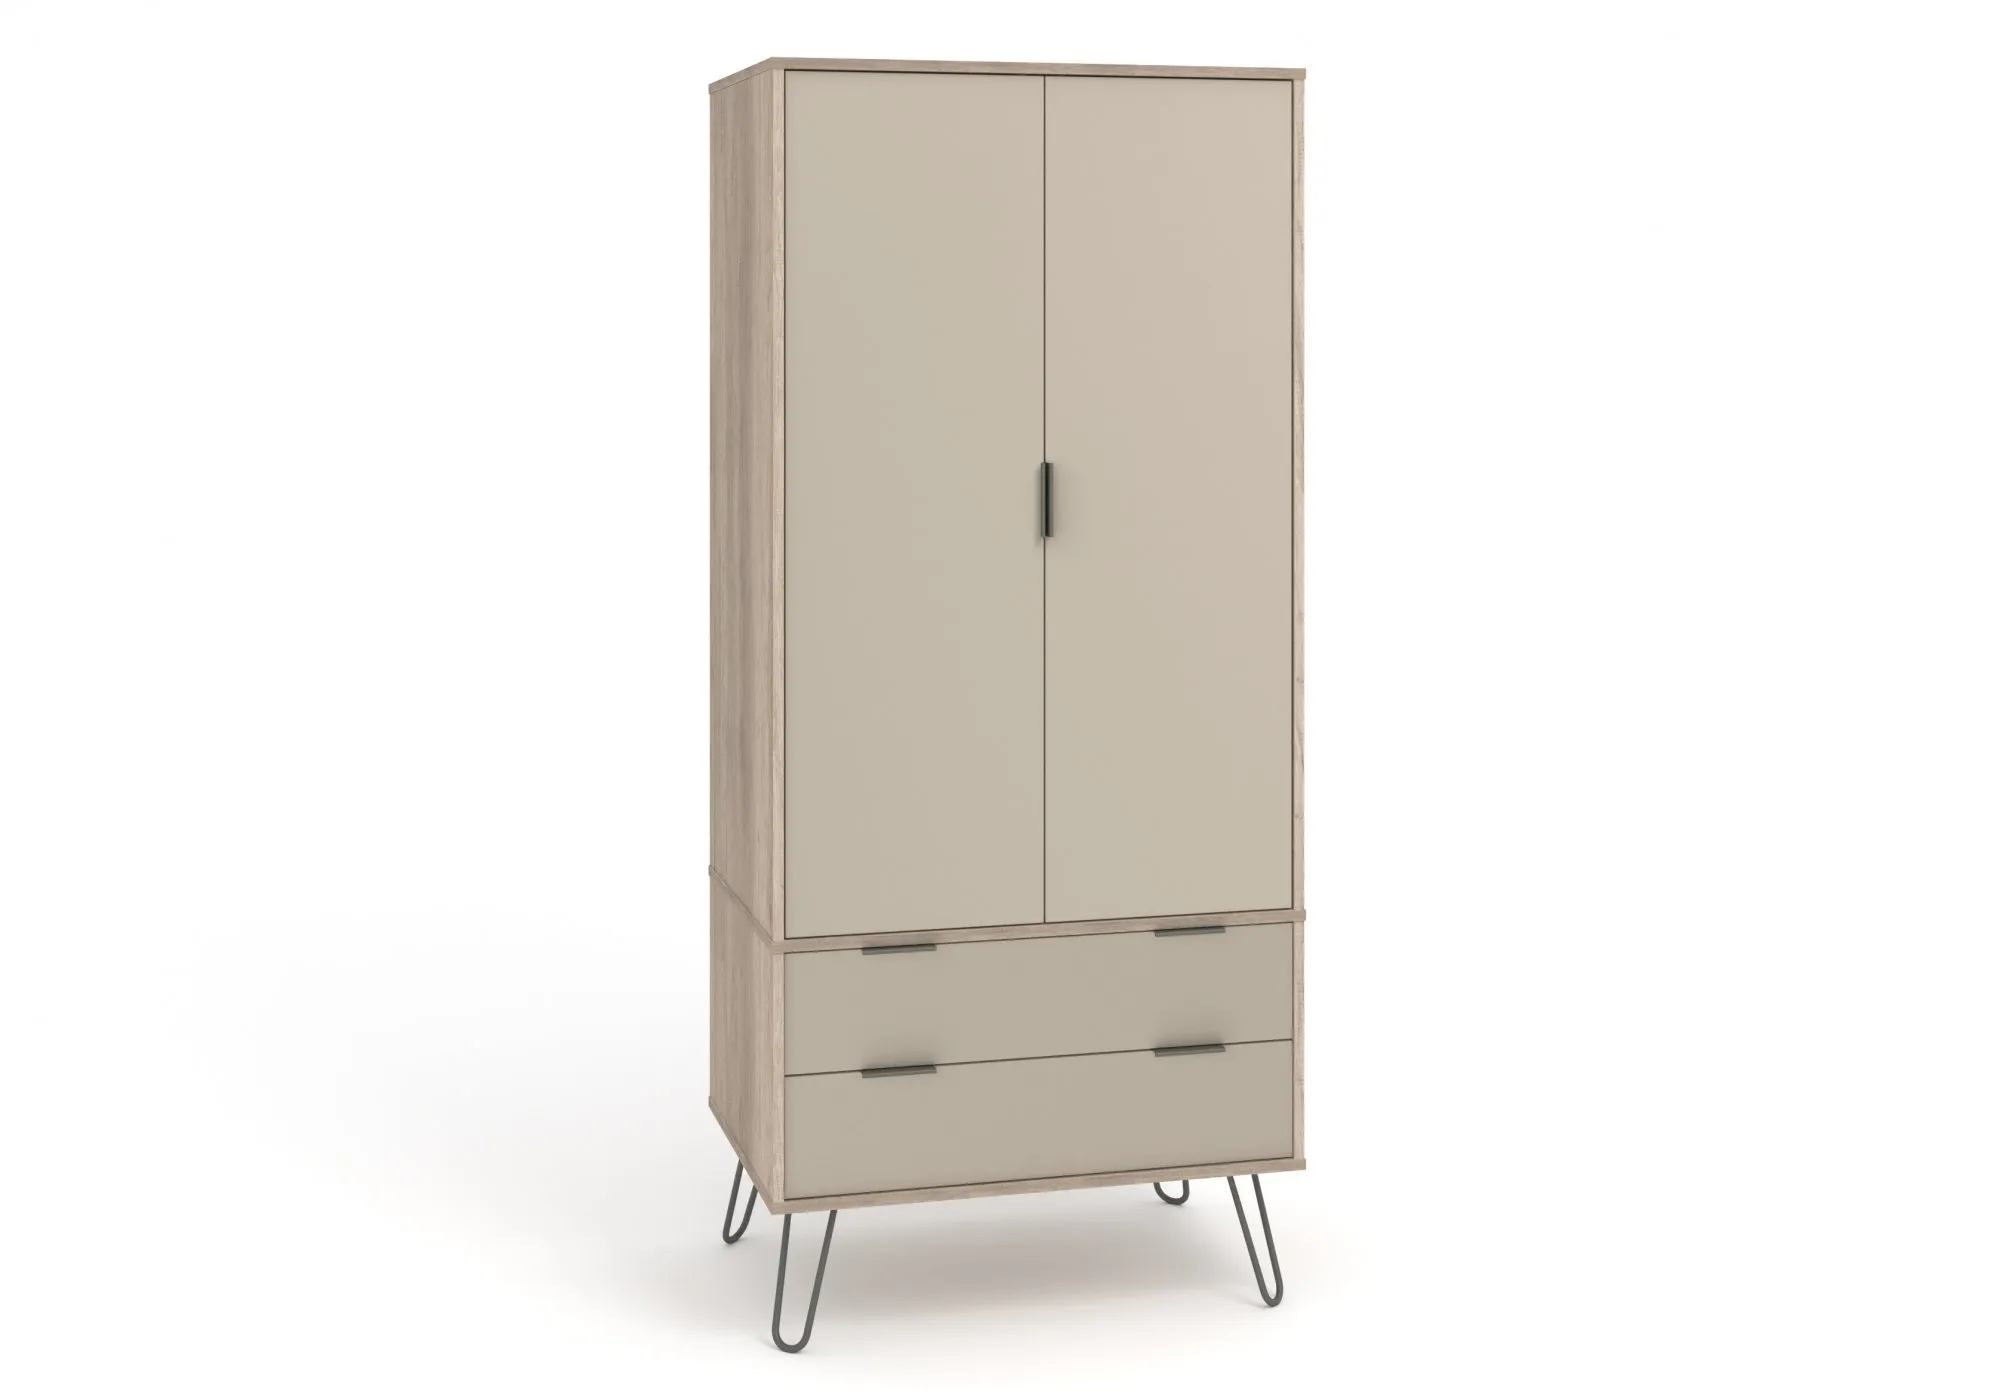 Core Products Core Augusta Driftwood and Calico 2 Door 2 Drawer Double Wardrobe